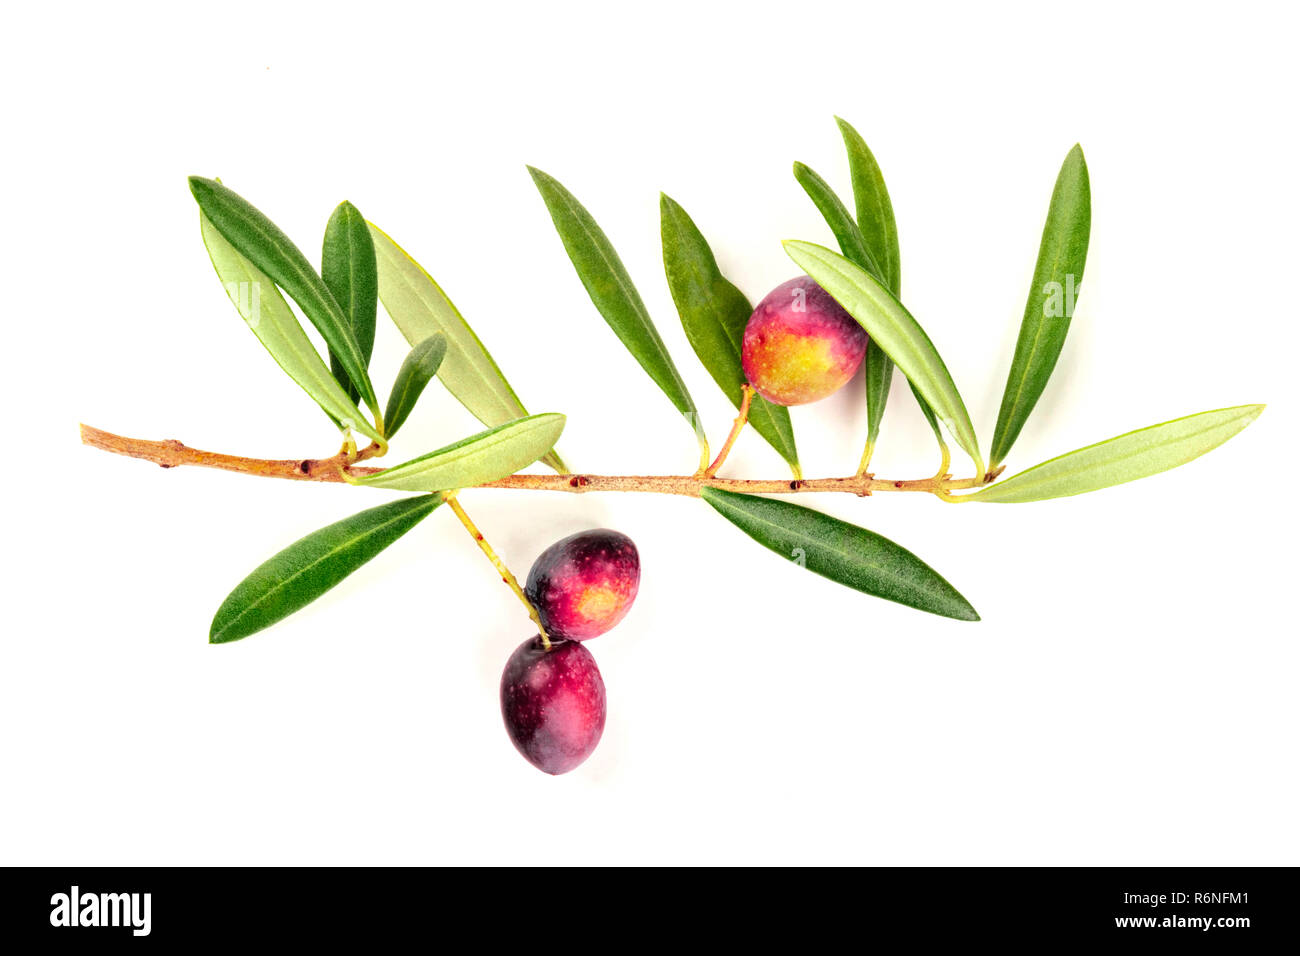 A photo of a vibrant green olive tree branch with berries, shot from above on a white background Stock Photo